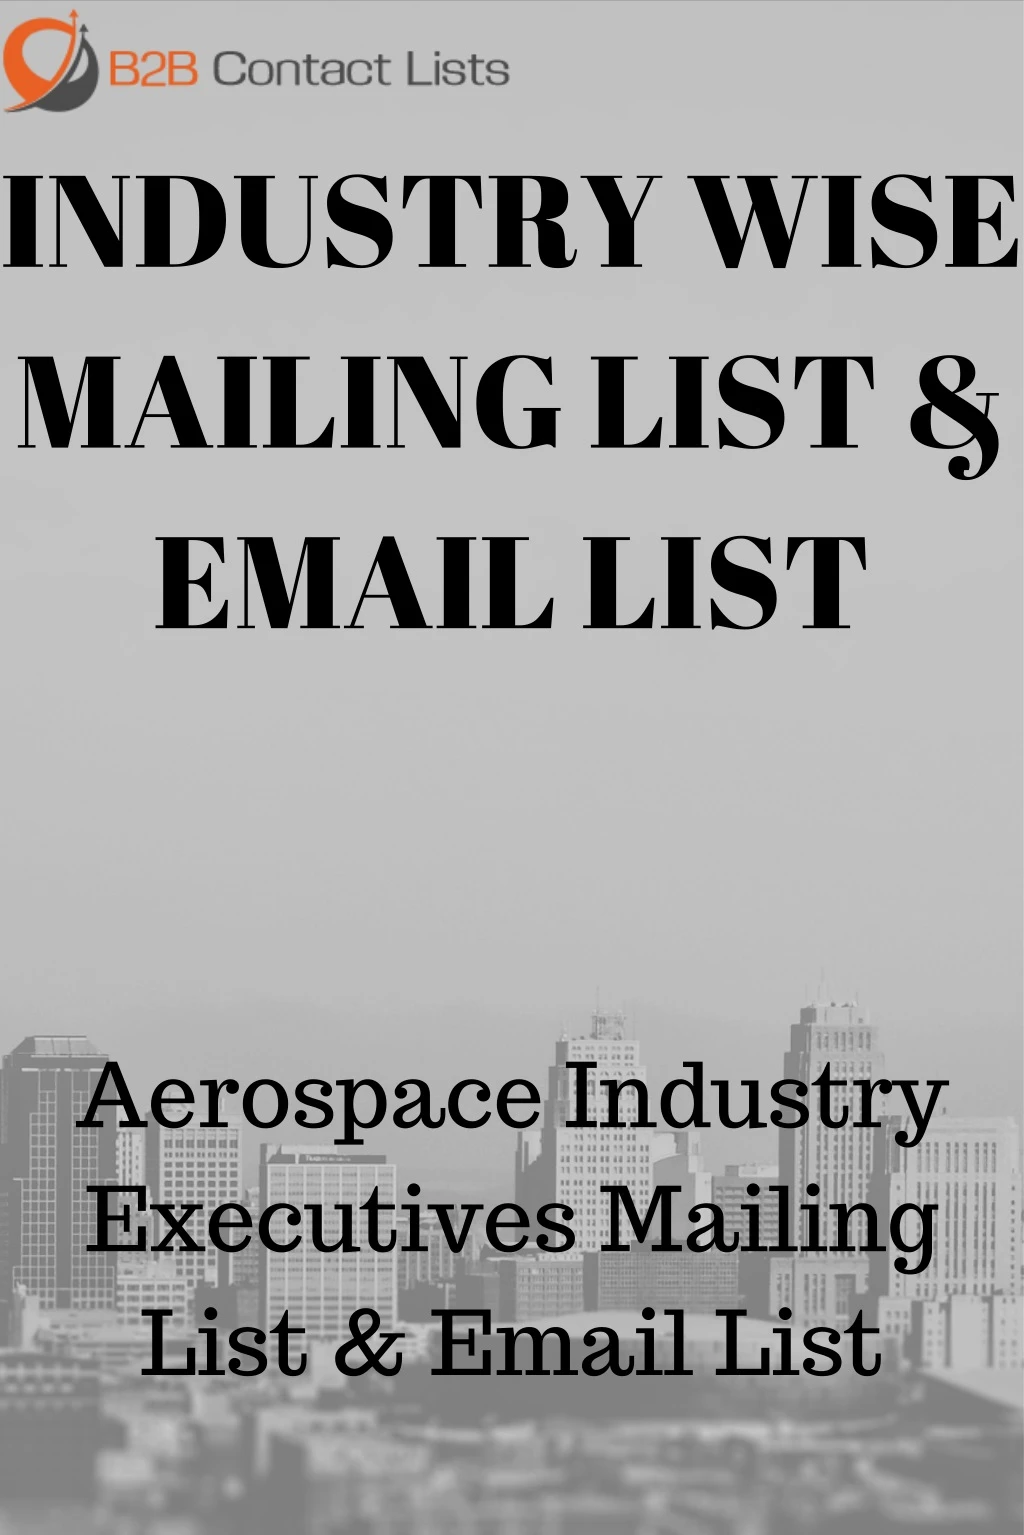 industry wise mailing list email list